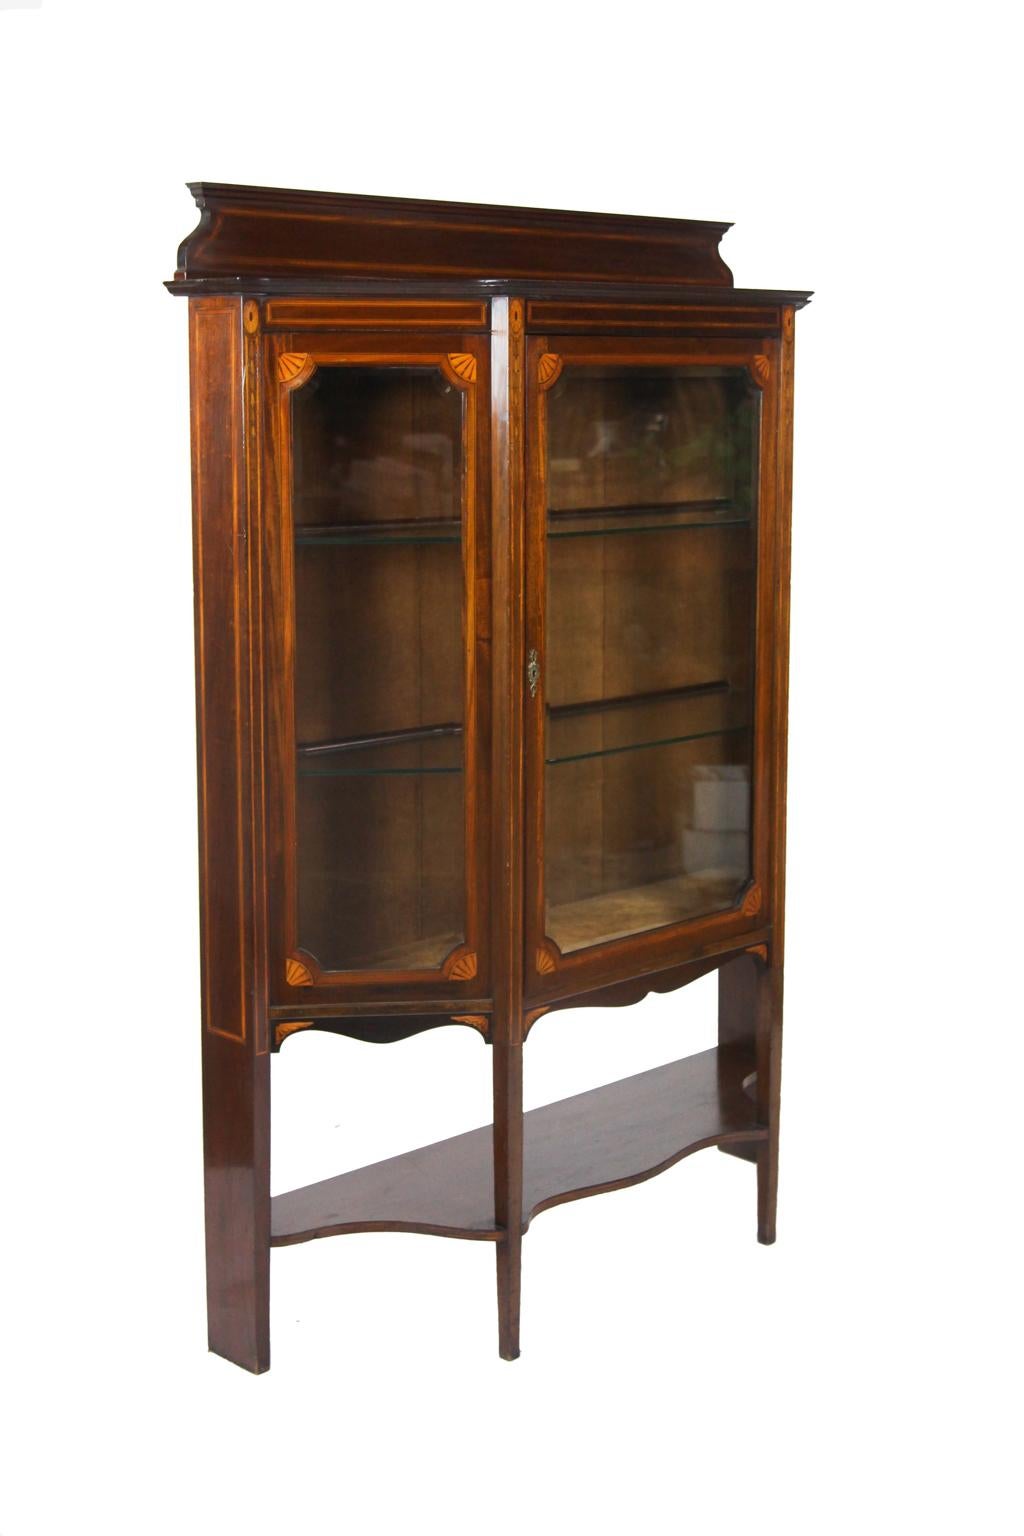 Inlaid Hepplewhite Style Display Cabinet In Good Condition For Sale In Wilson, NC